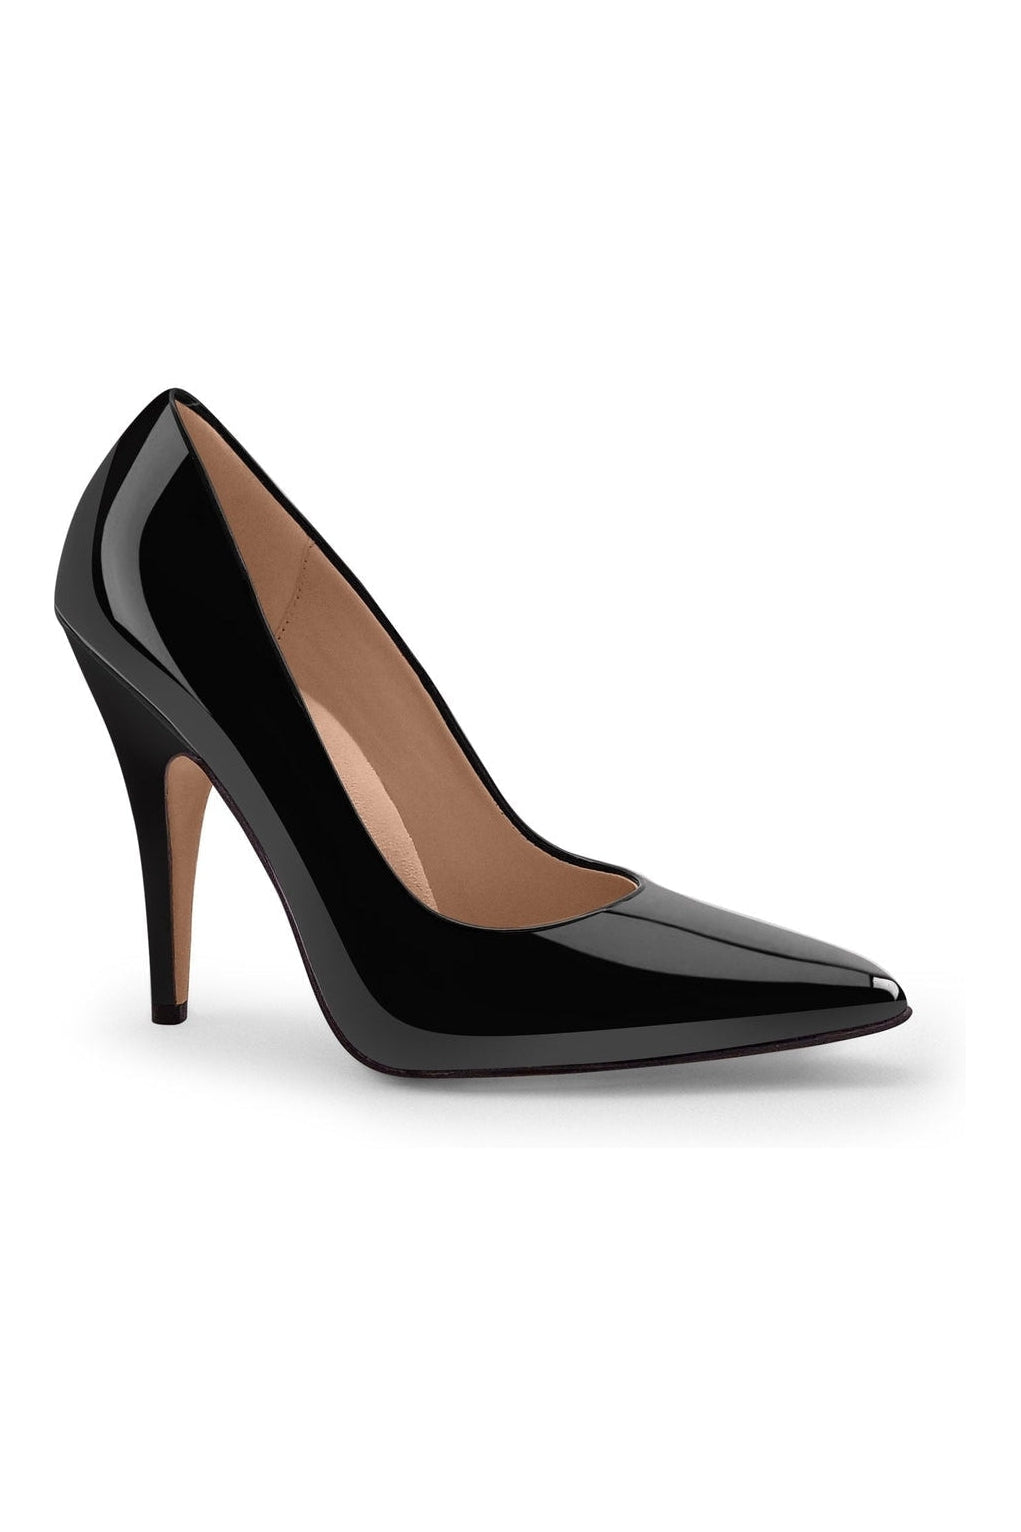 Classic Sexy Wide Width Pump-Pumps-Sexyshoes Signature-Black-SEXYSHOES.COM